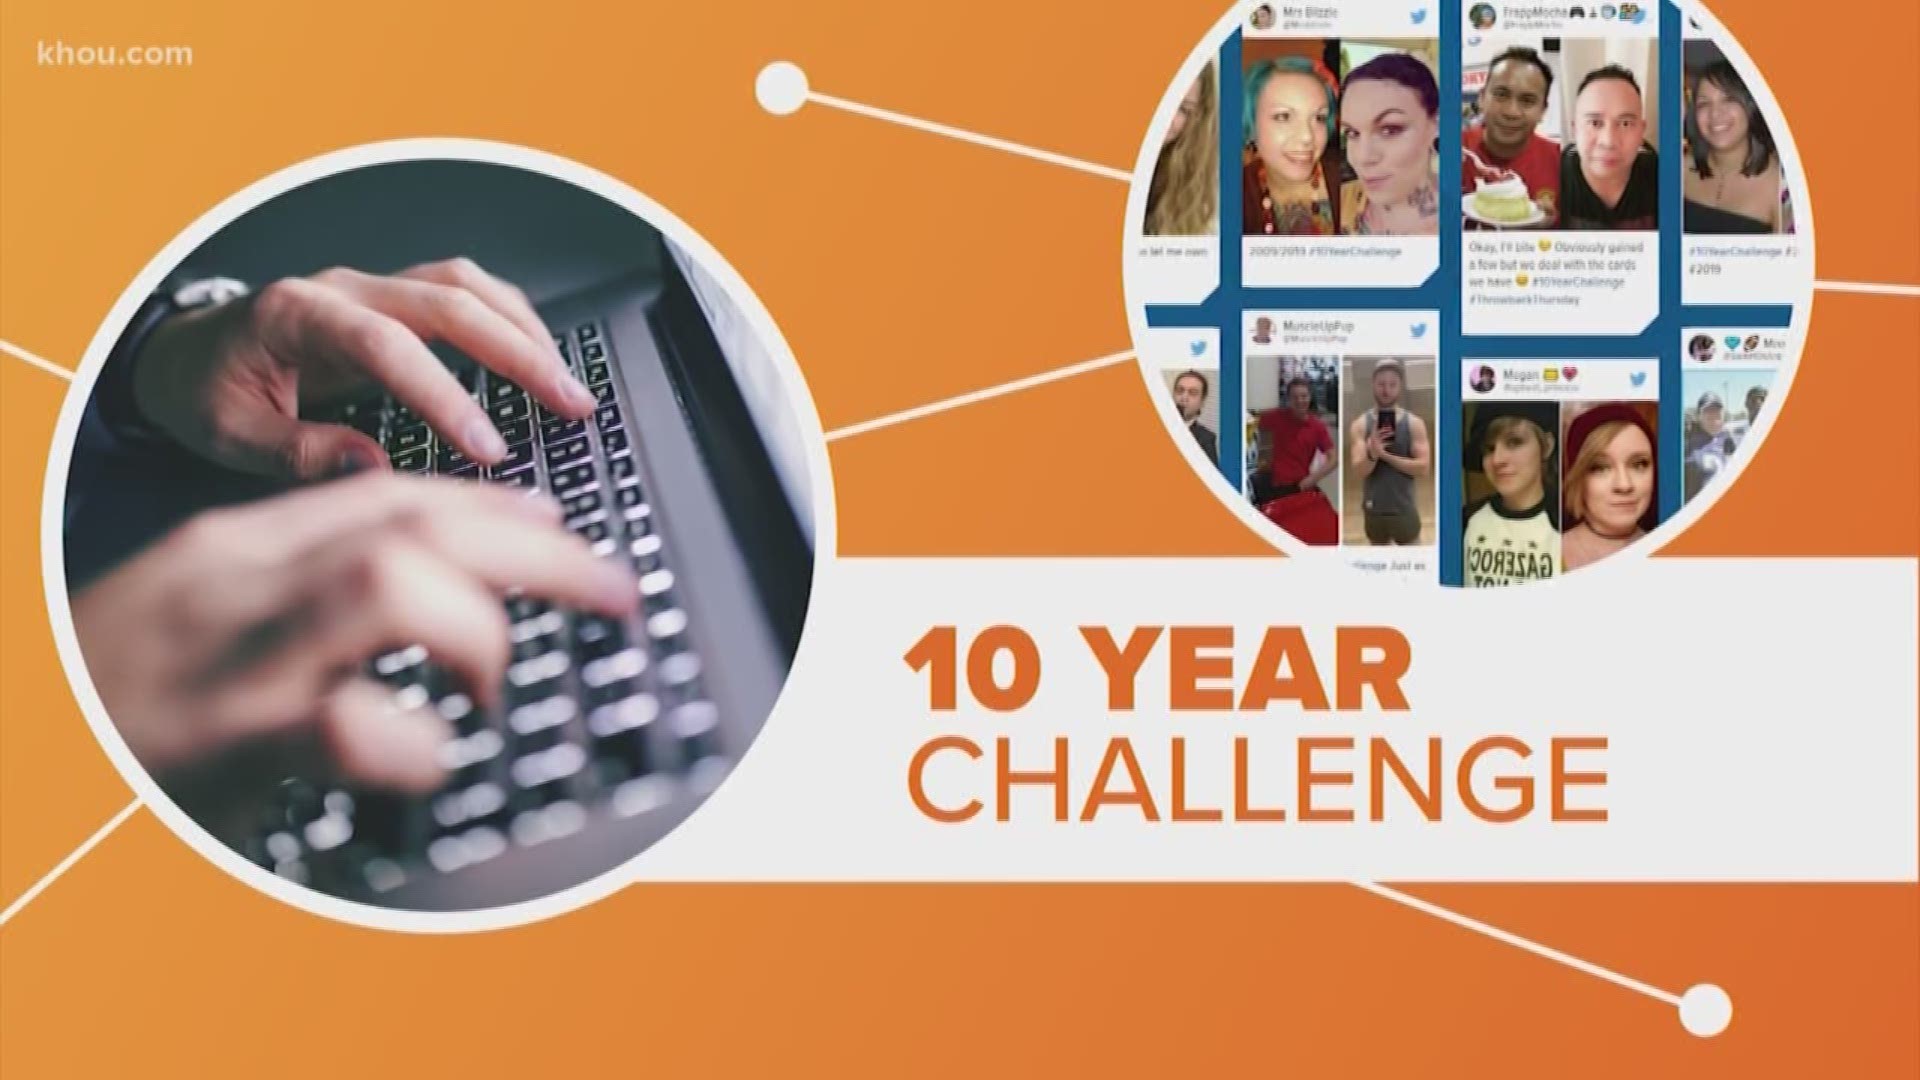 Do you remember the 10-year challenge? And it's making a comeback as we close out the decade. But you may want to think before you join the trend.